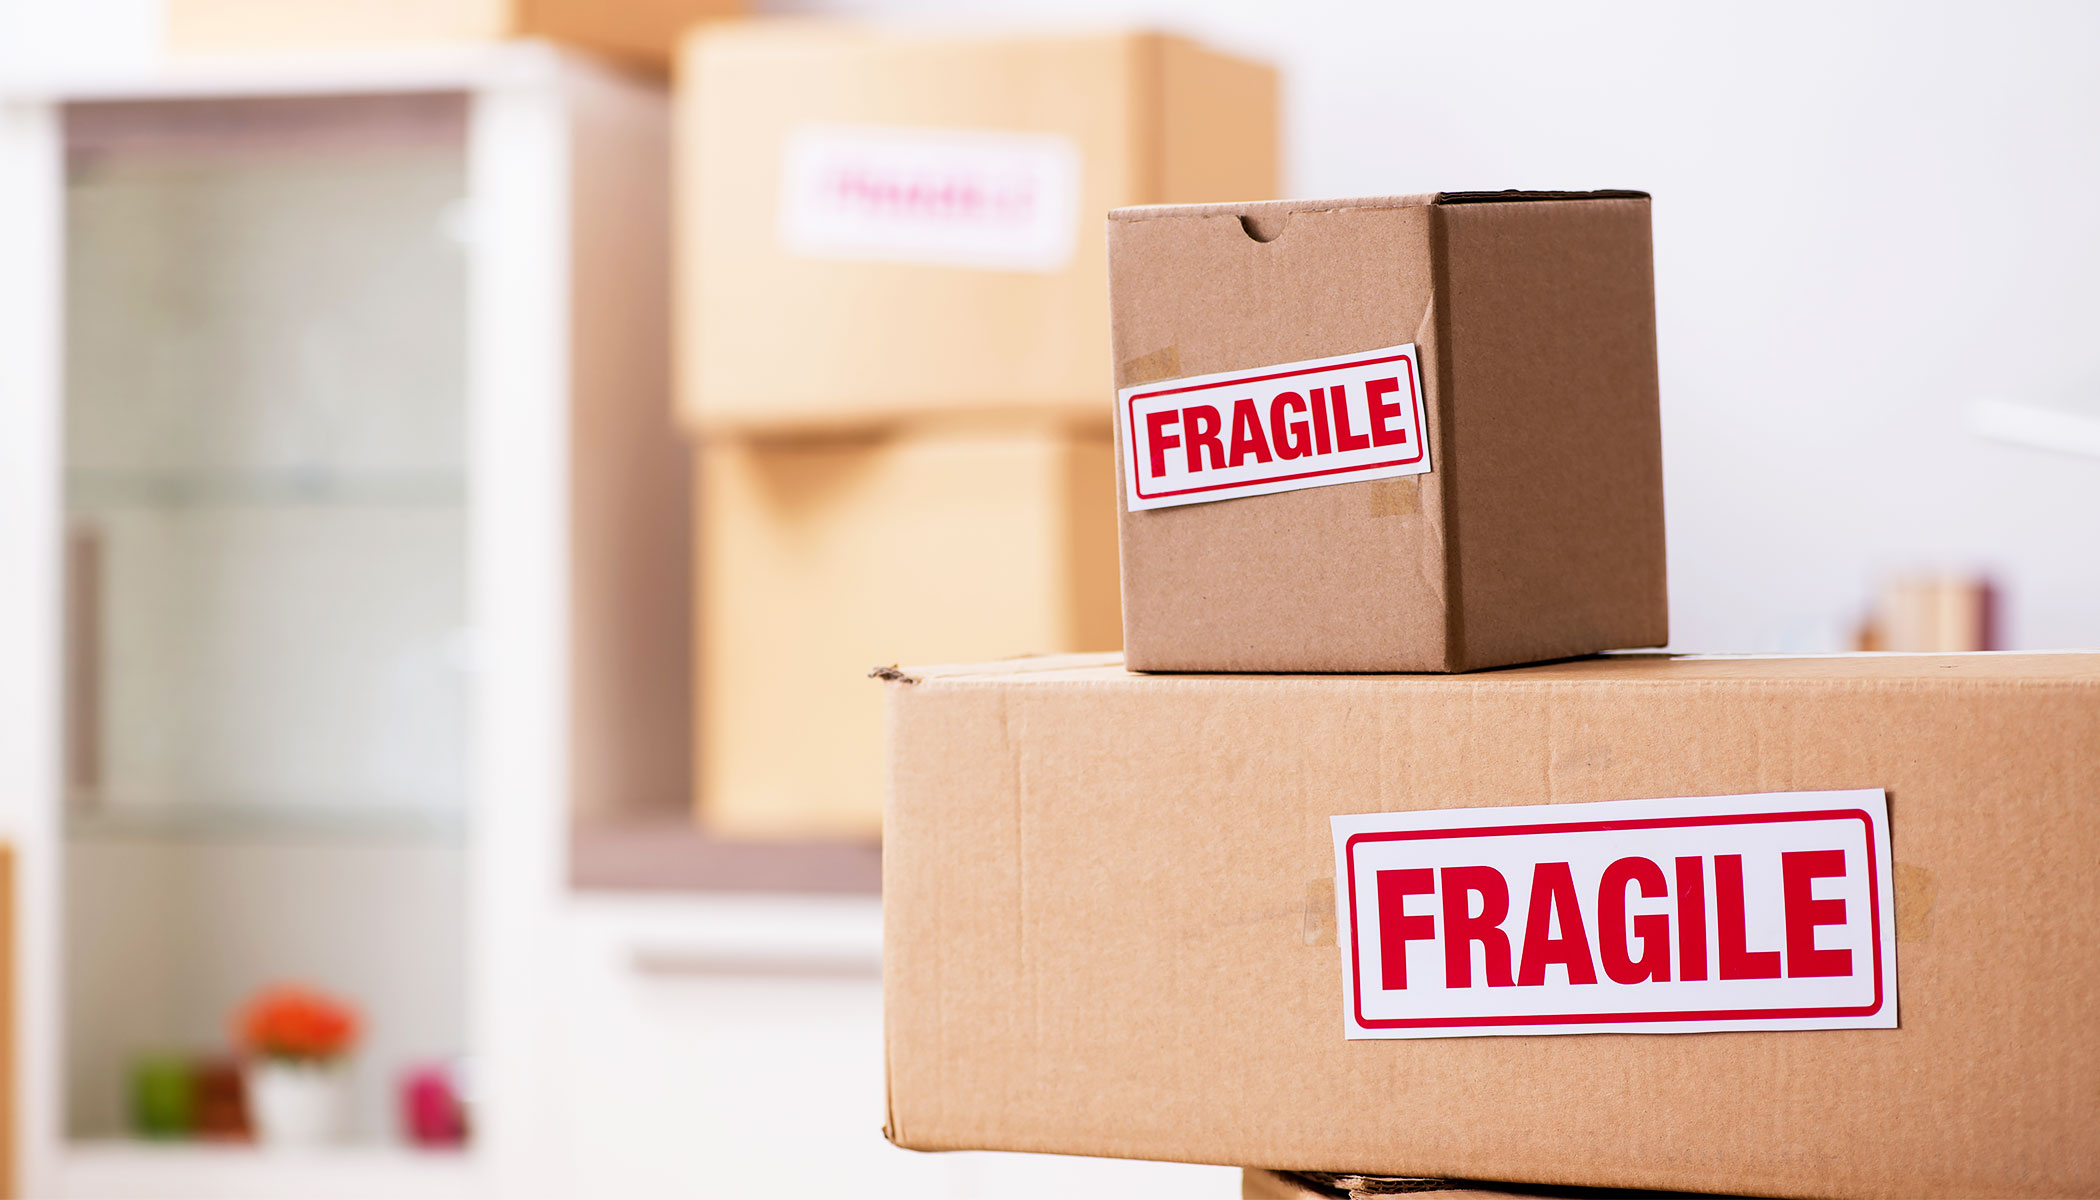 Fragile items packing